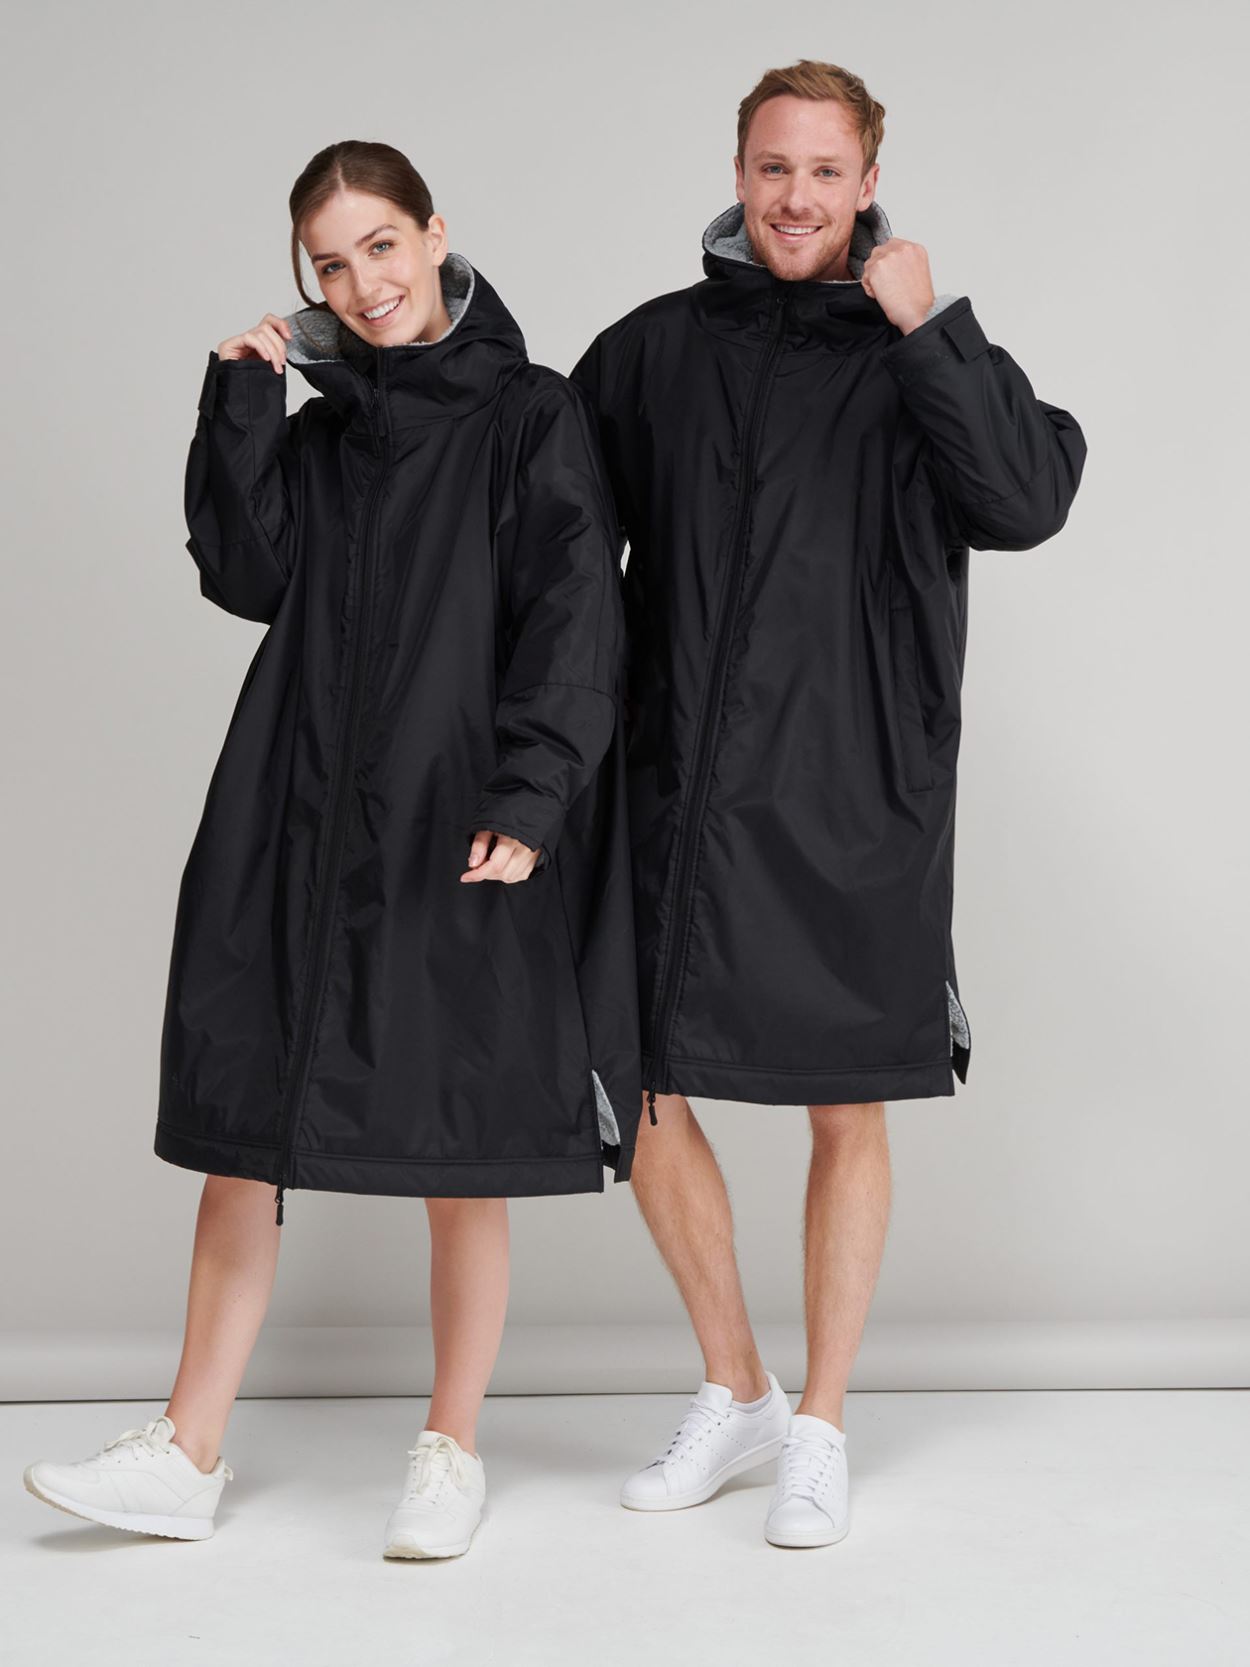 LV690 Adults All Weather Robe Image 1 Thumbnail